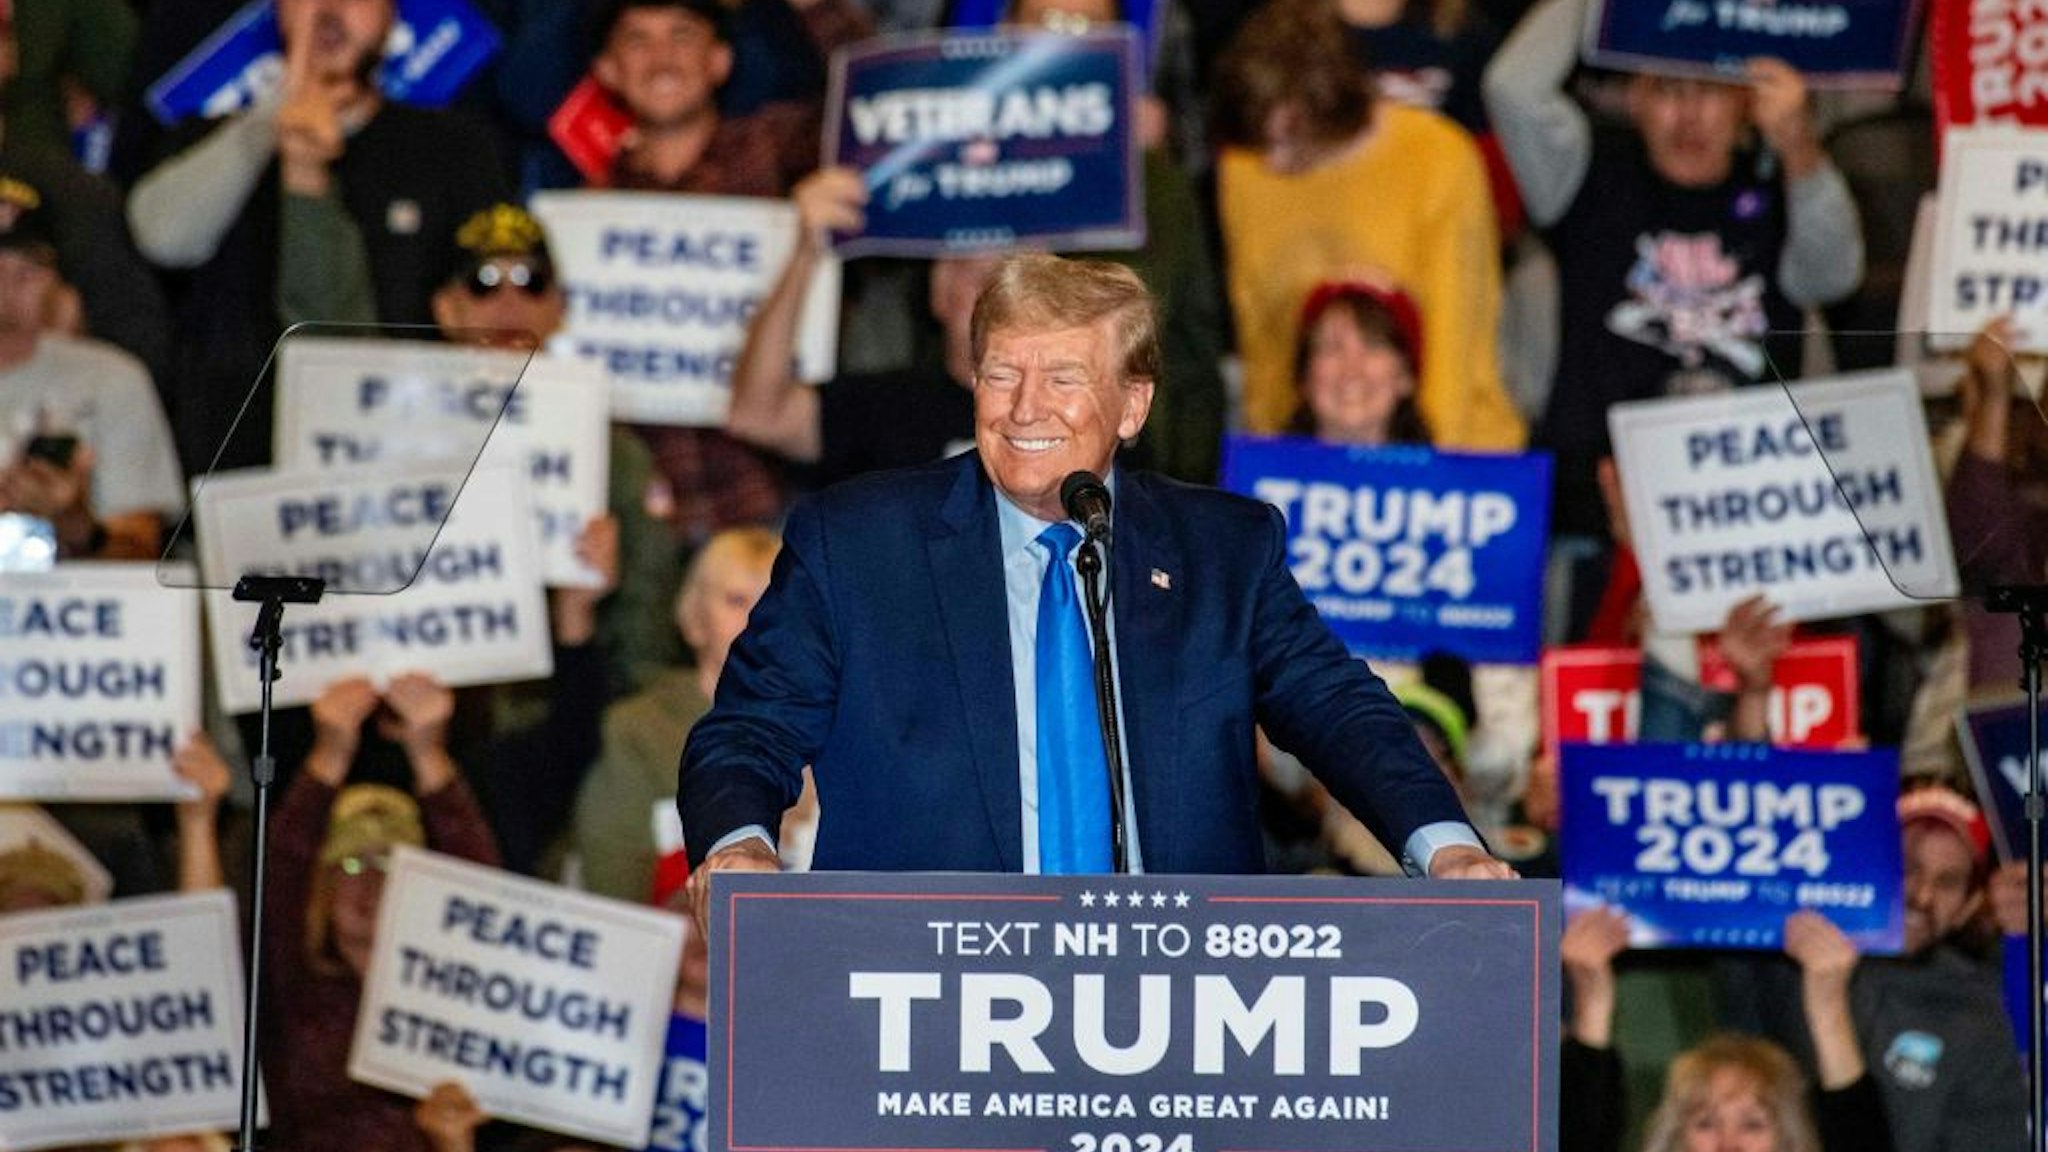 Former US president and 2024 Republican president candidate Donald Trump speaks at a campaign rally in Claremont, New Hampshire, on November 11, 2023. (Photo by JOSEPH PREZIOSO / AFP)